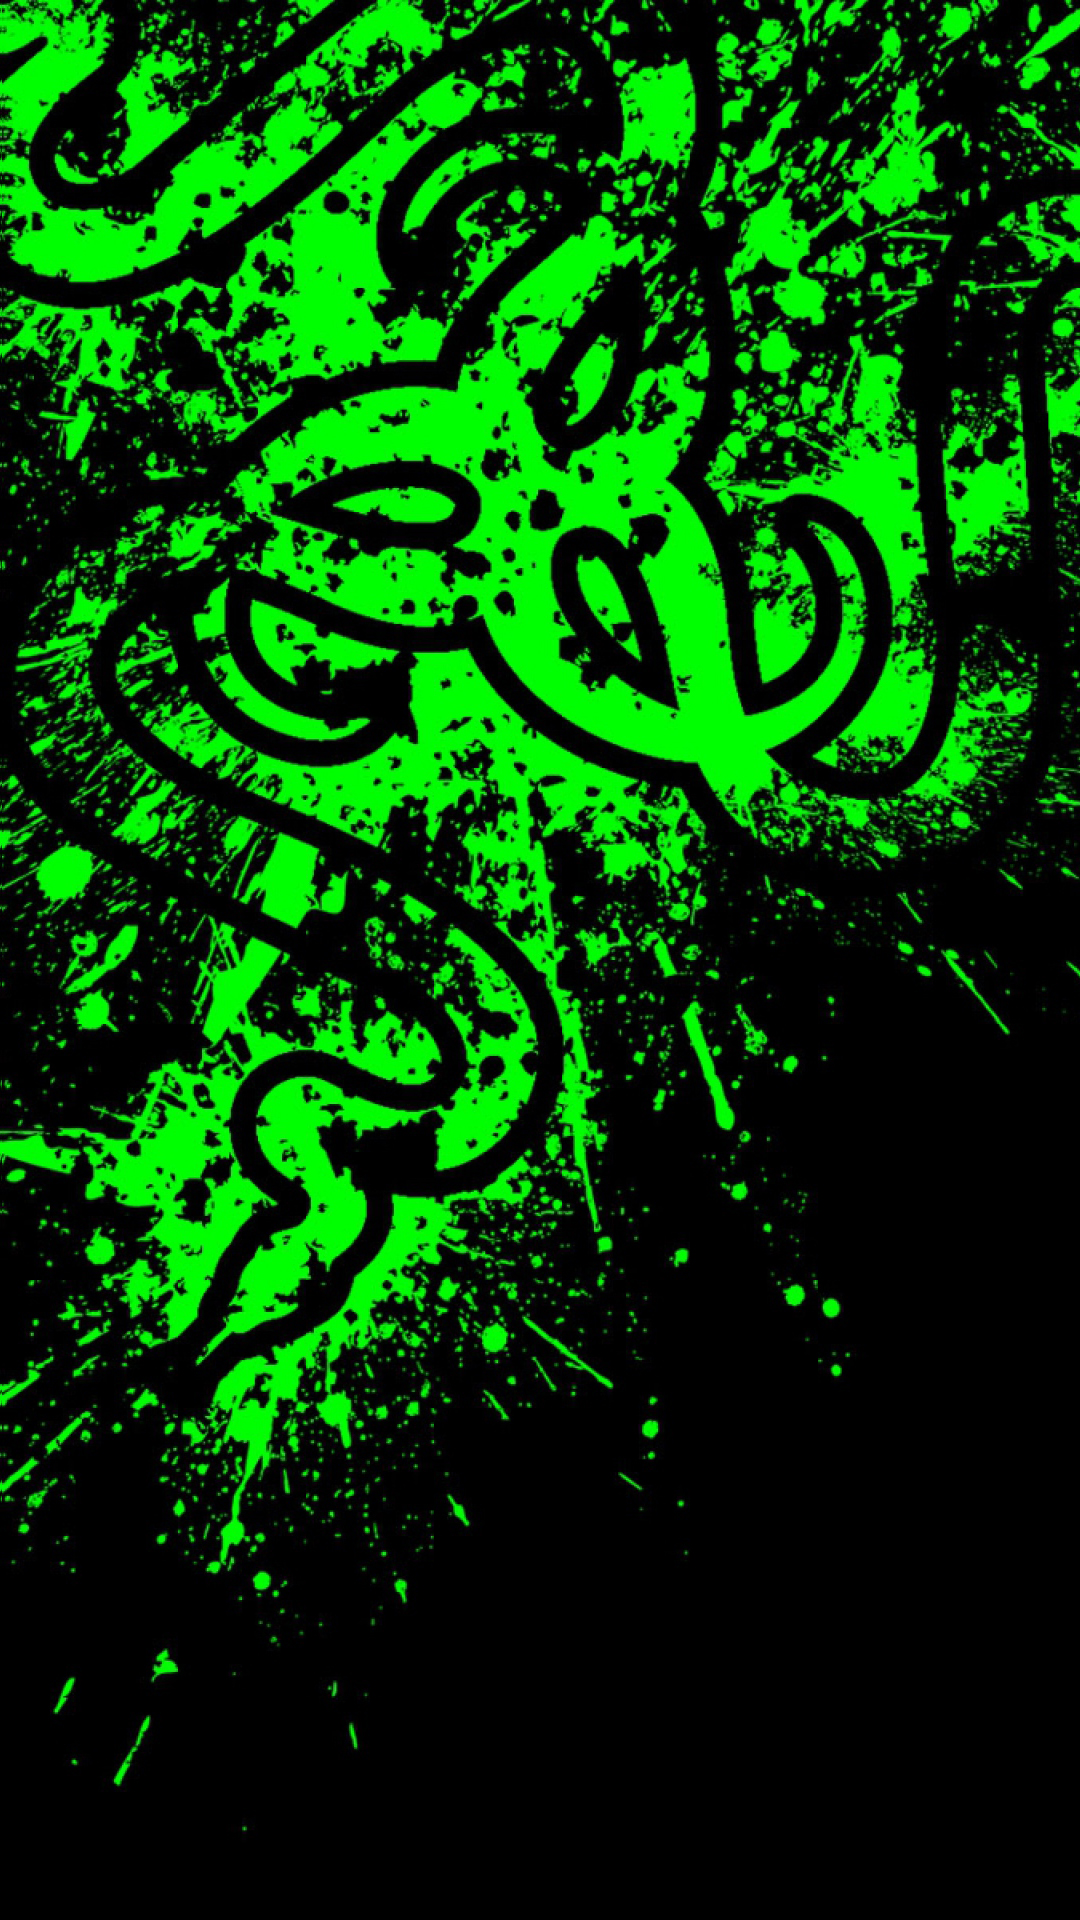 Razer HD Wallpaper For Your Mobile Phone